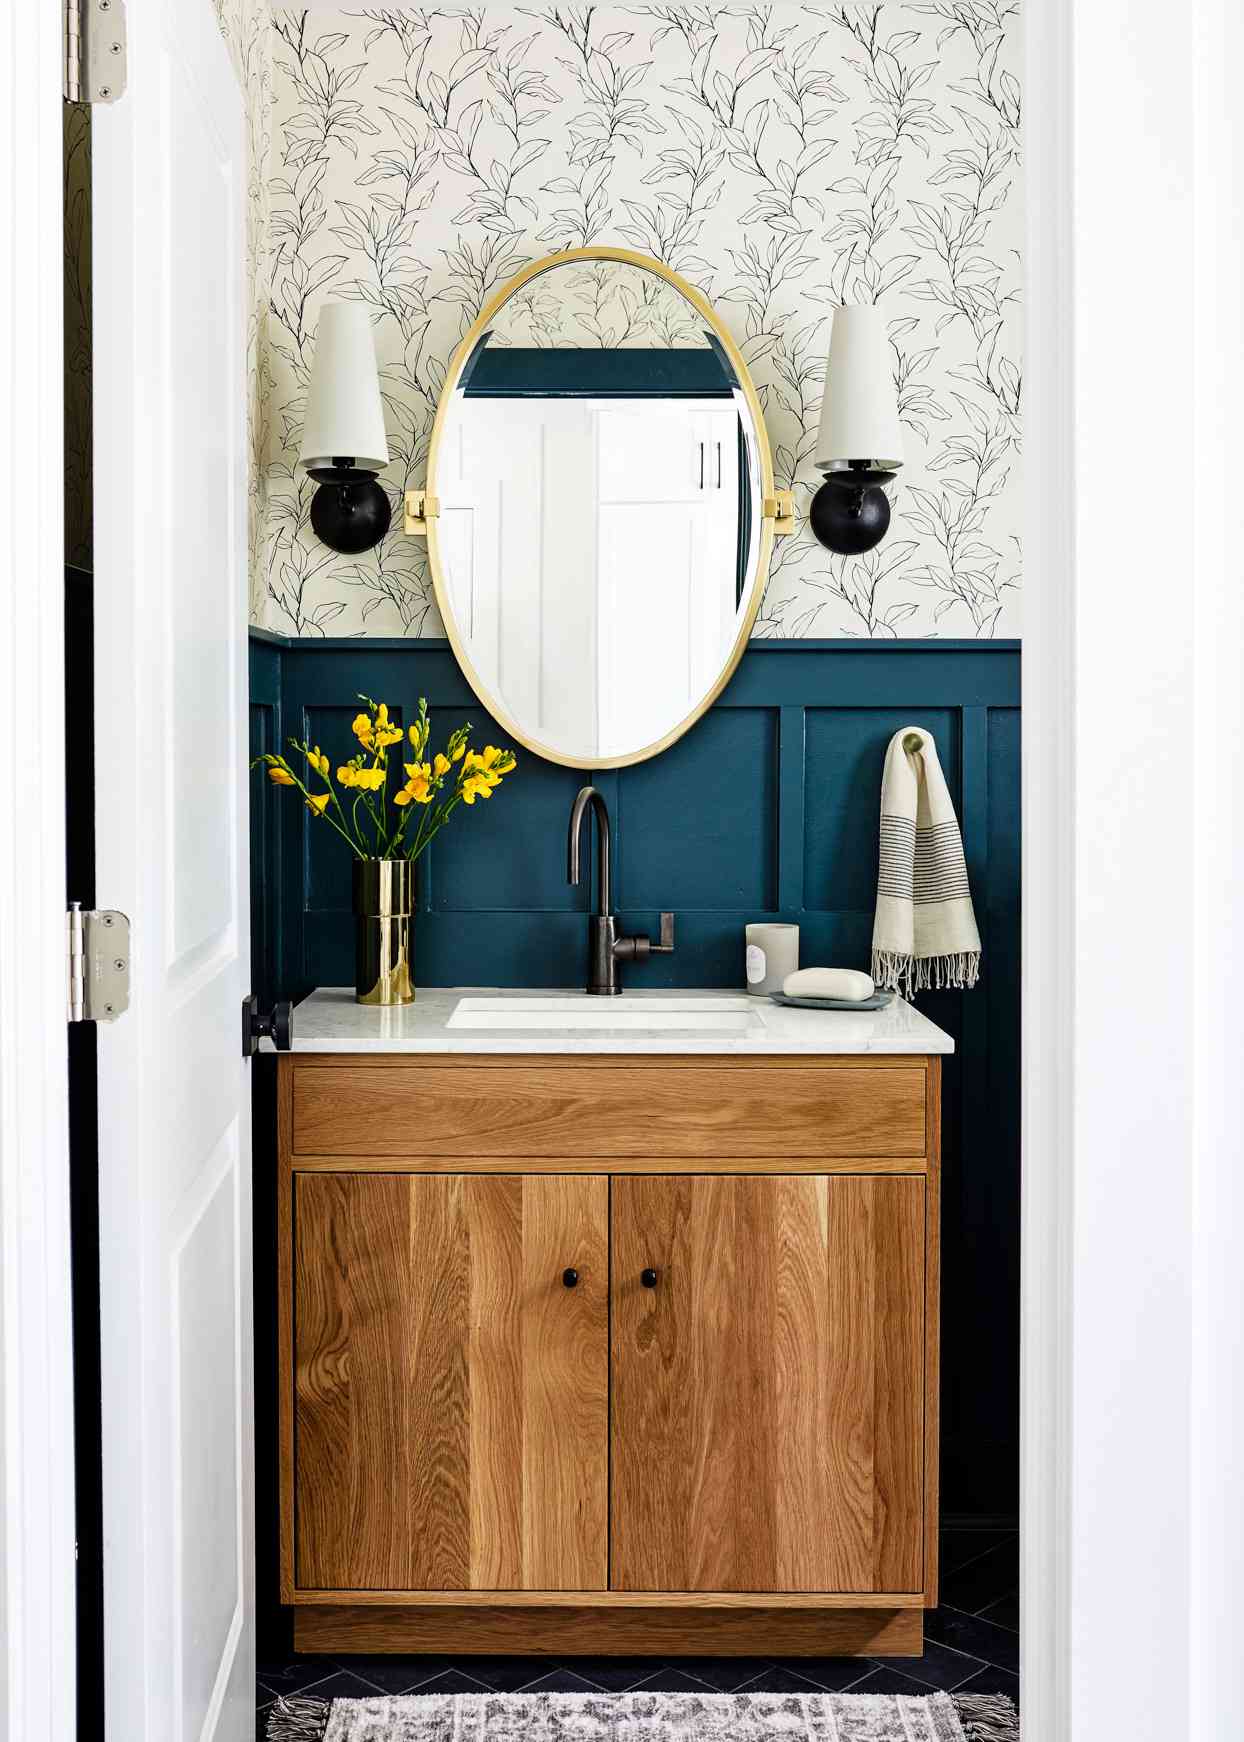 wallpapered bathroom with black sconces and wooden vanity